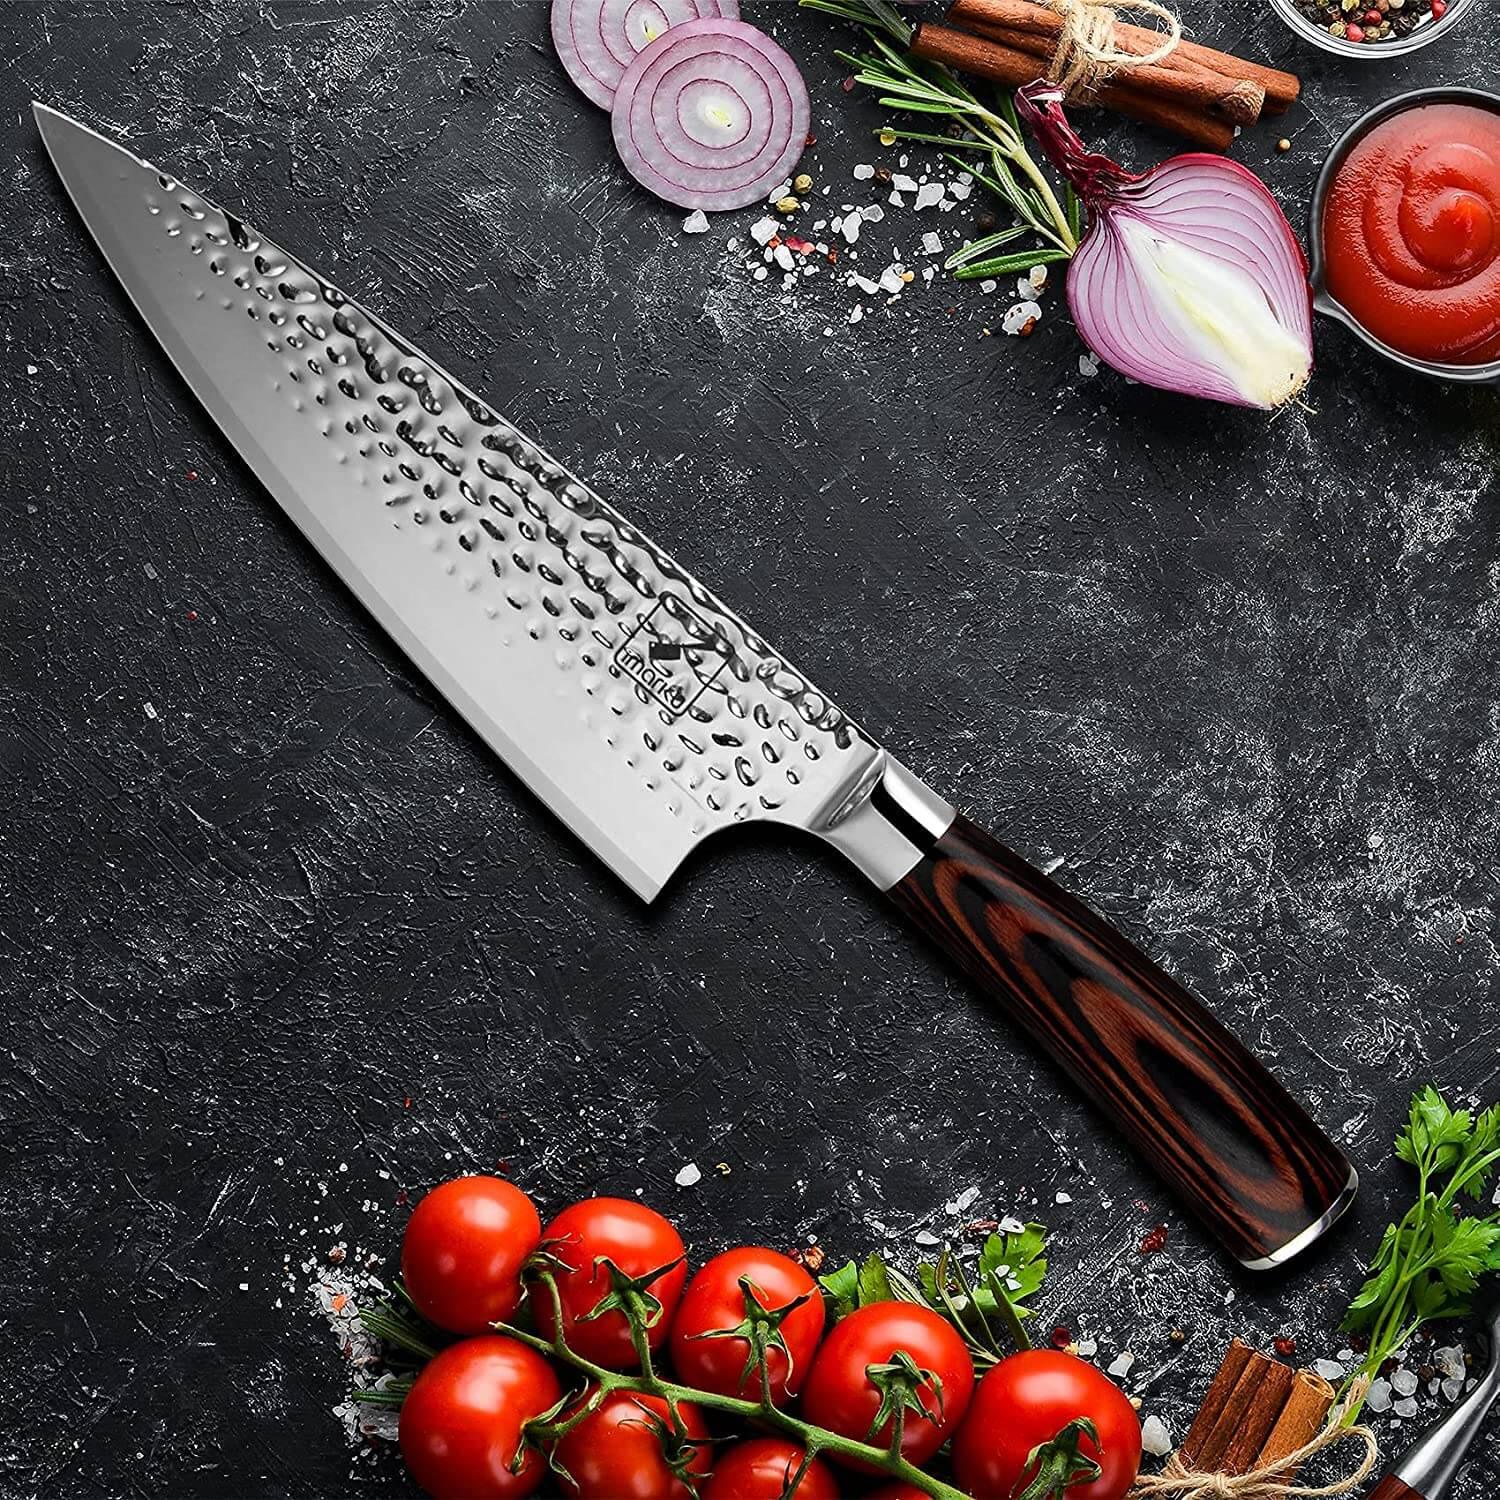 imarku Pro Kitchen 8 inch Chef's Knife High Carbon Stainless Steel Sharp Knives